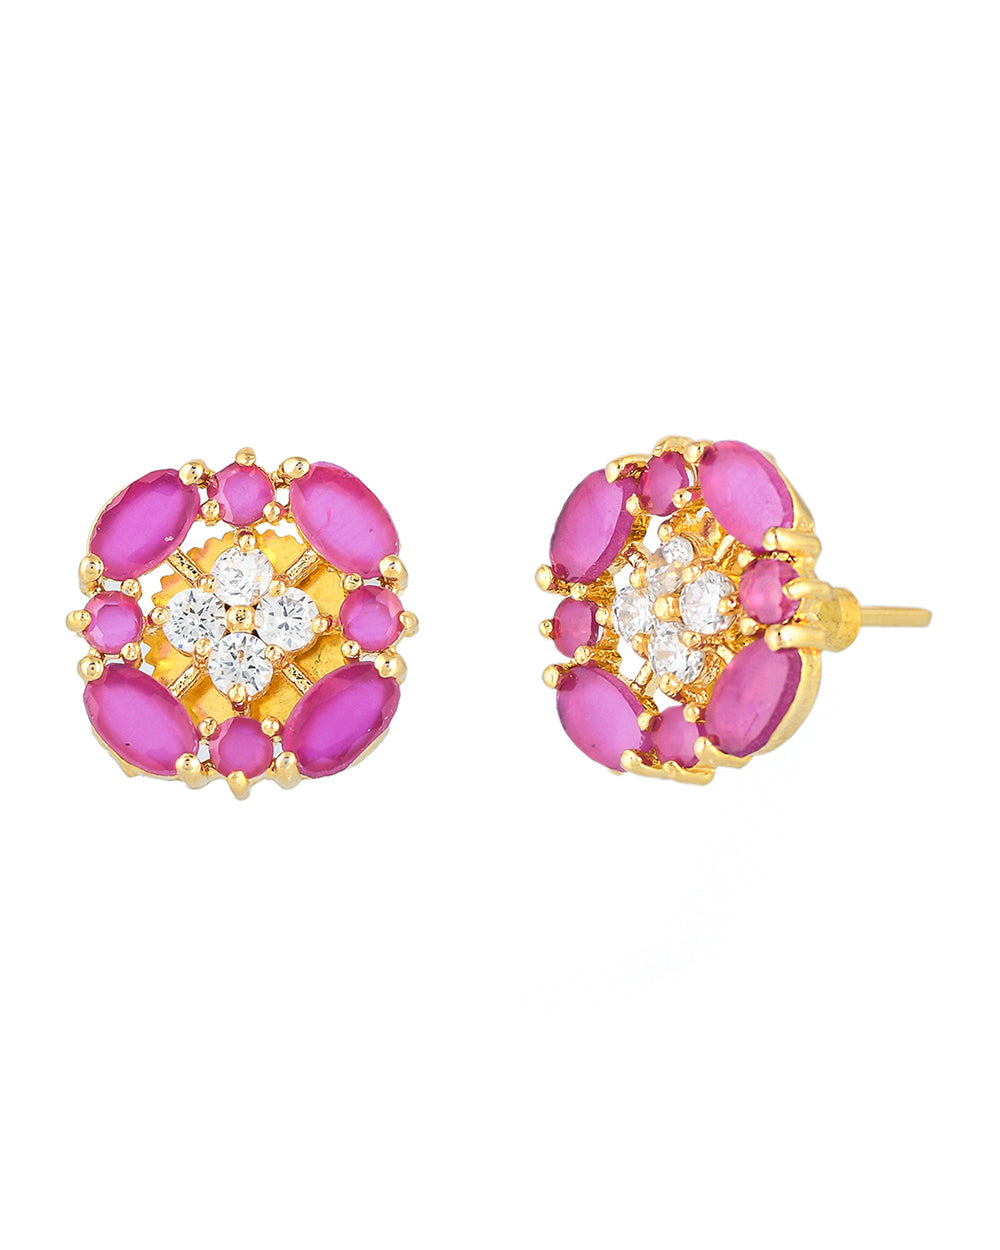 Women's Tiny White And Pink Cz Stud Earrings - Voylla